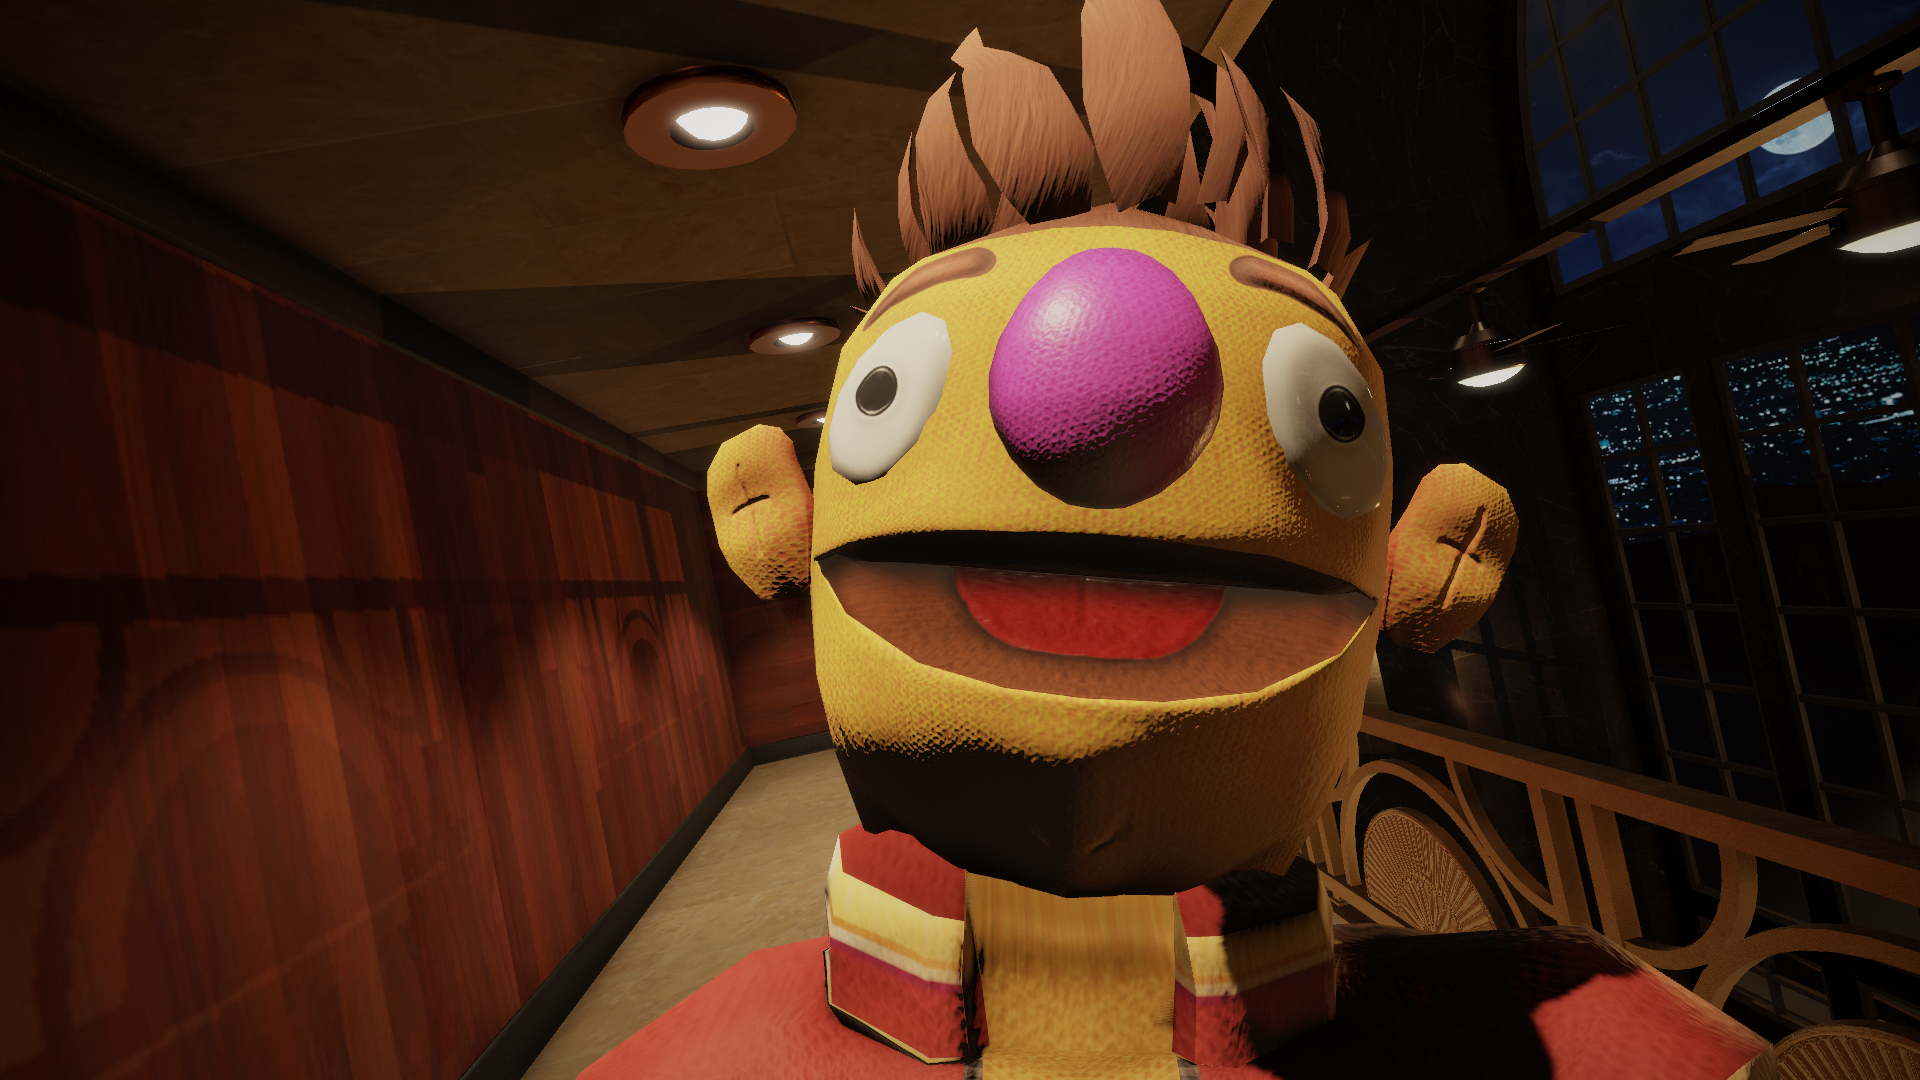 A close-up shot of a wide-eyed puppet strangling the player in My Friendly Neighborhood.